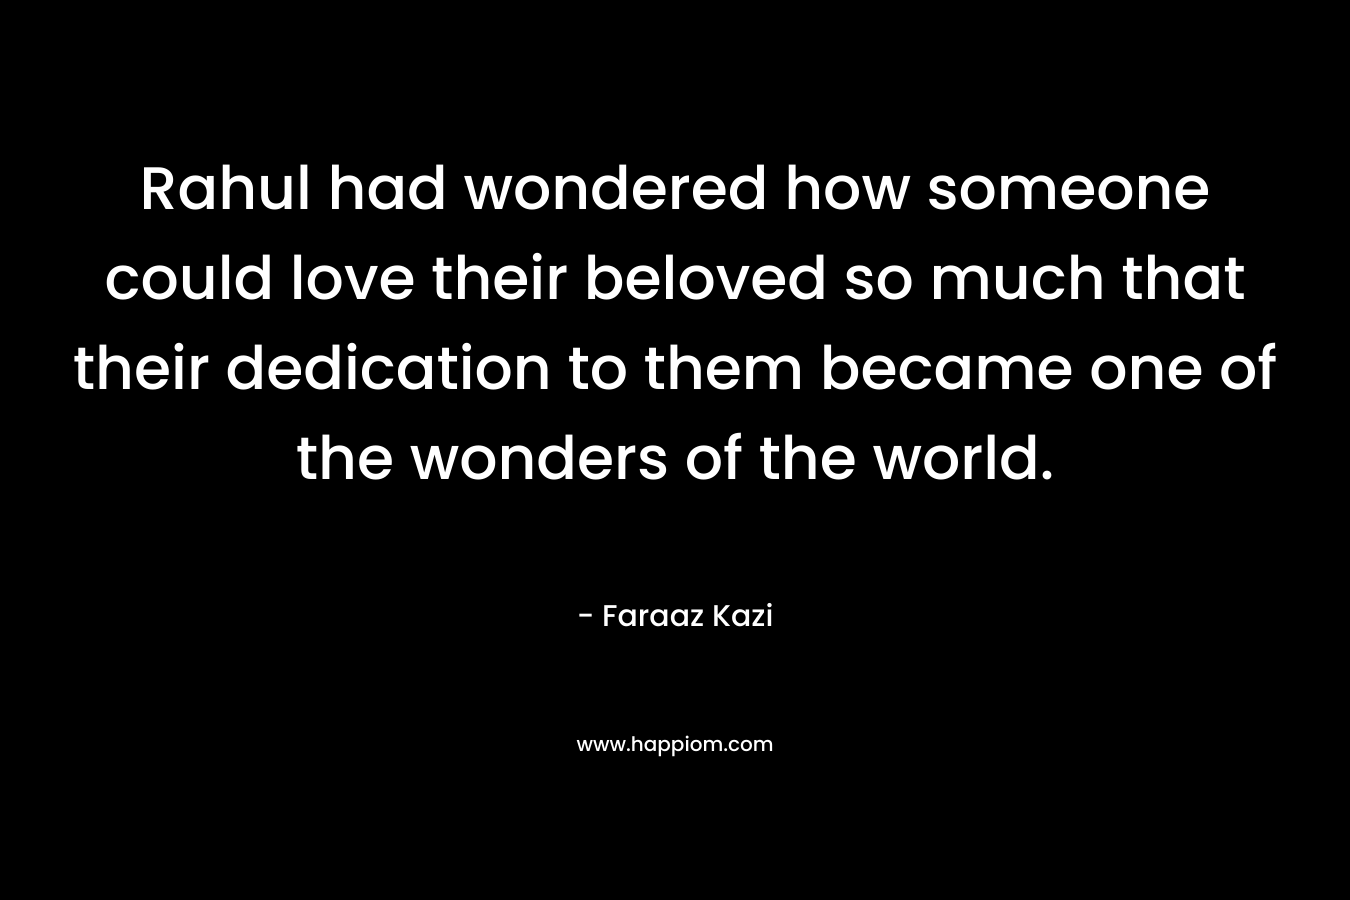 Rahul had wondered how someone could love their beloved so much that their dedication to them became one of the wonders of the world. – Faraaz Kazi